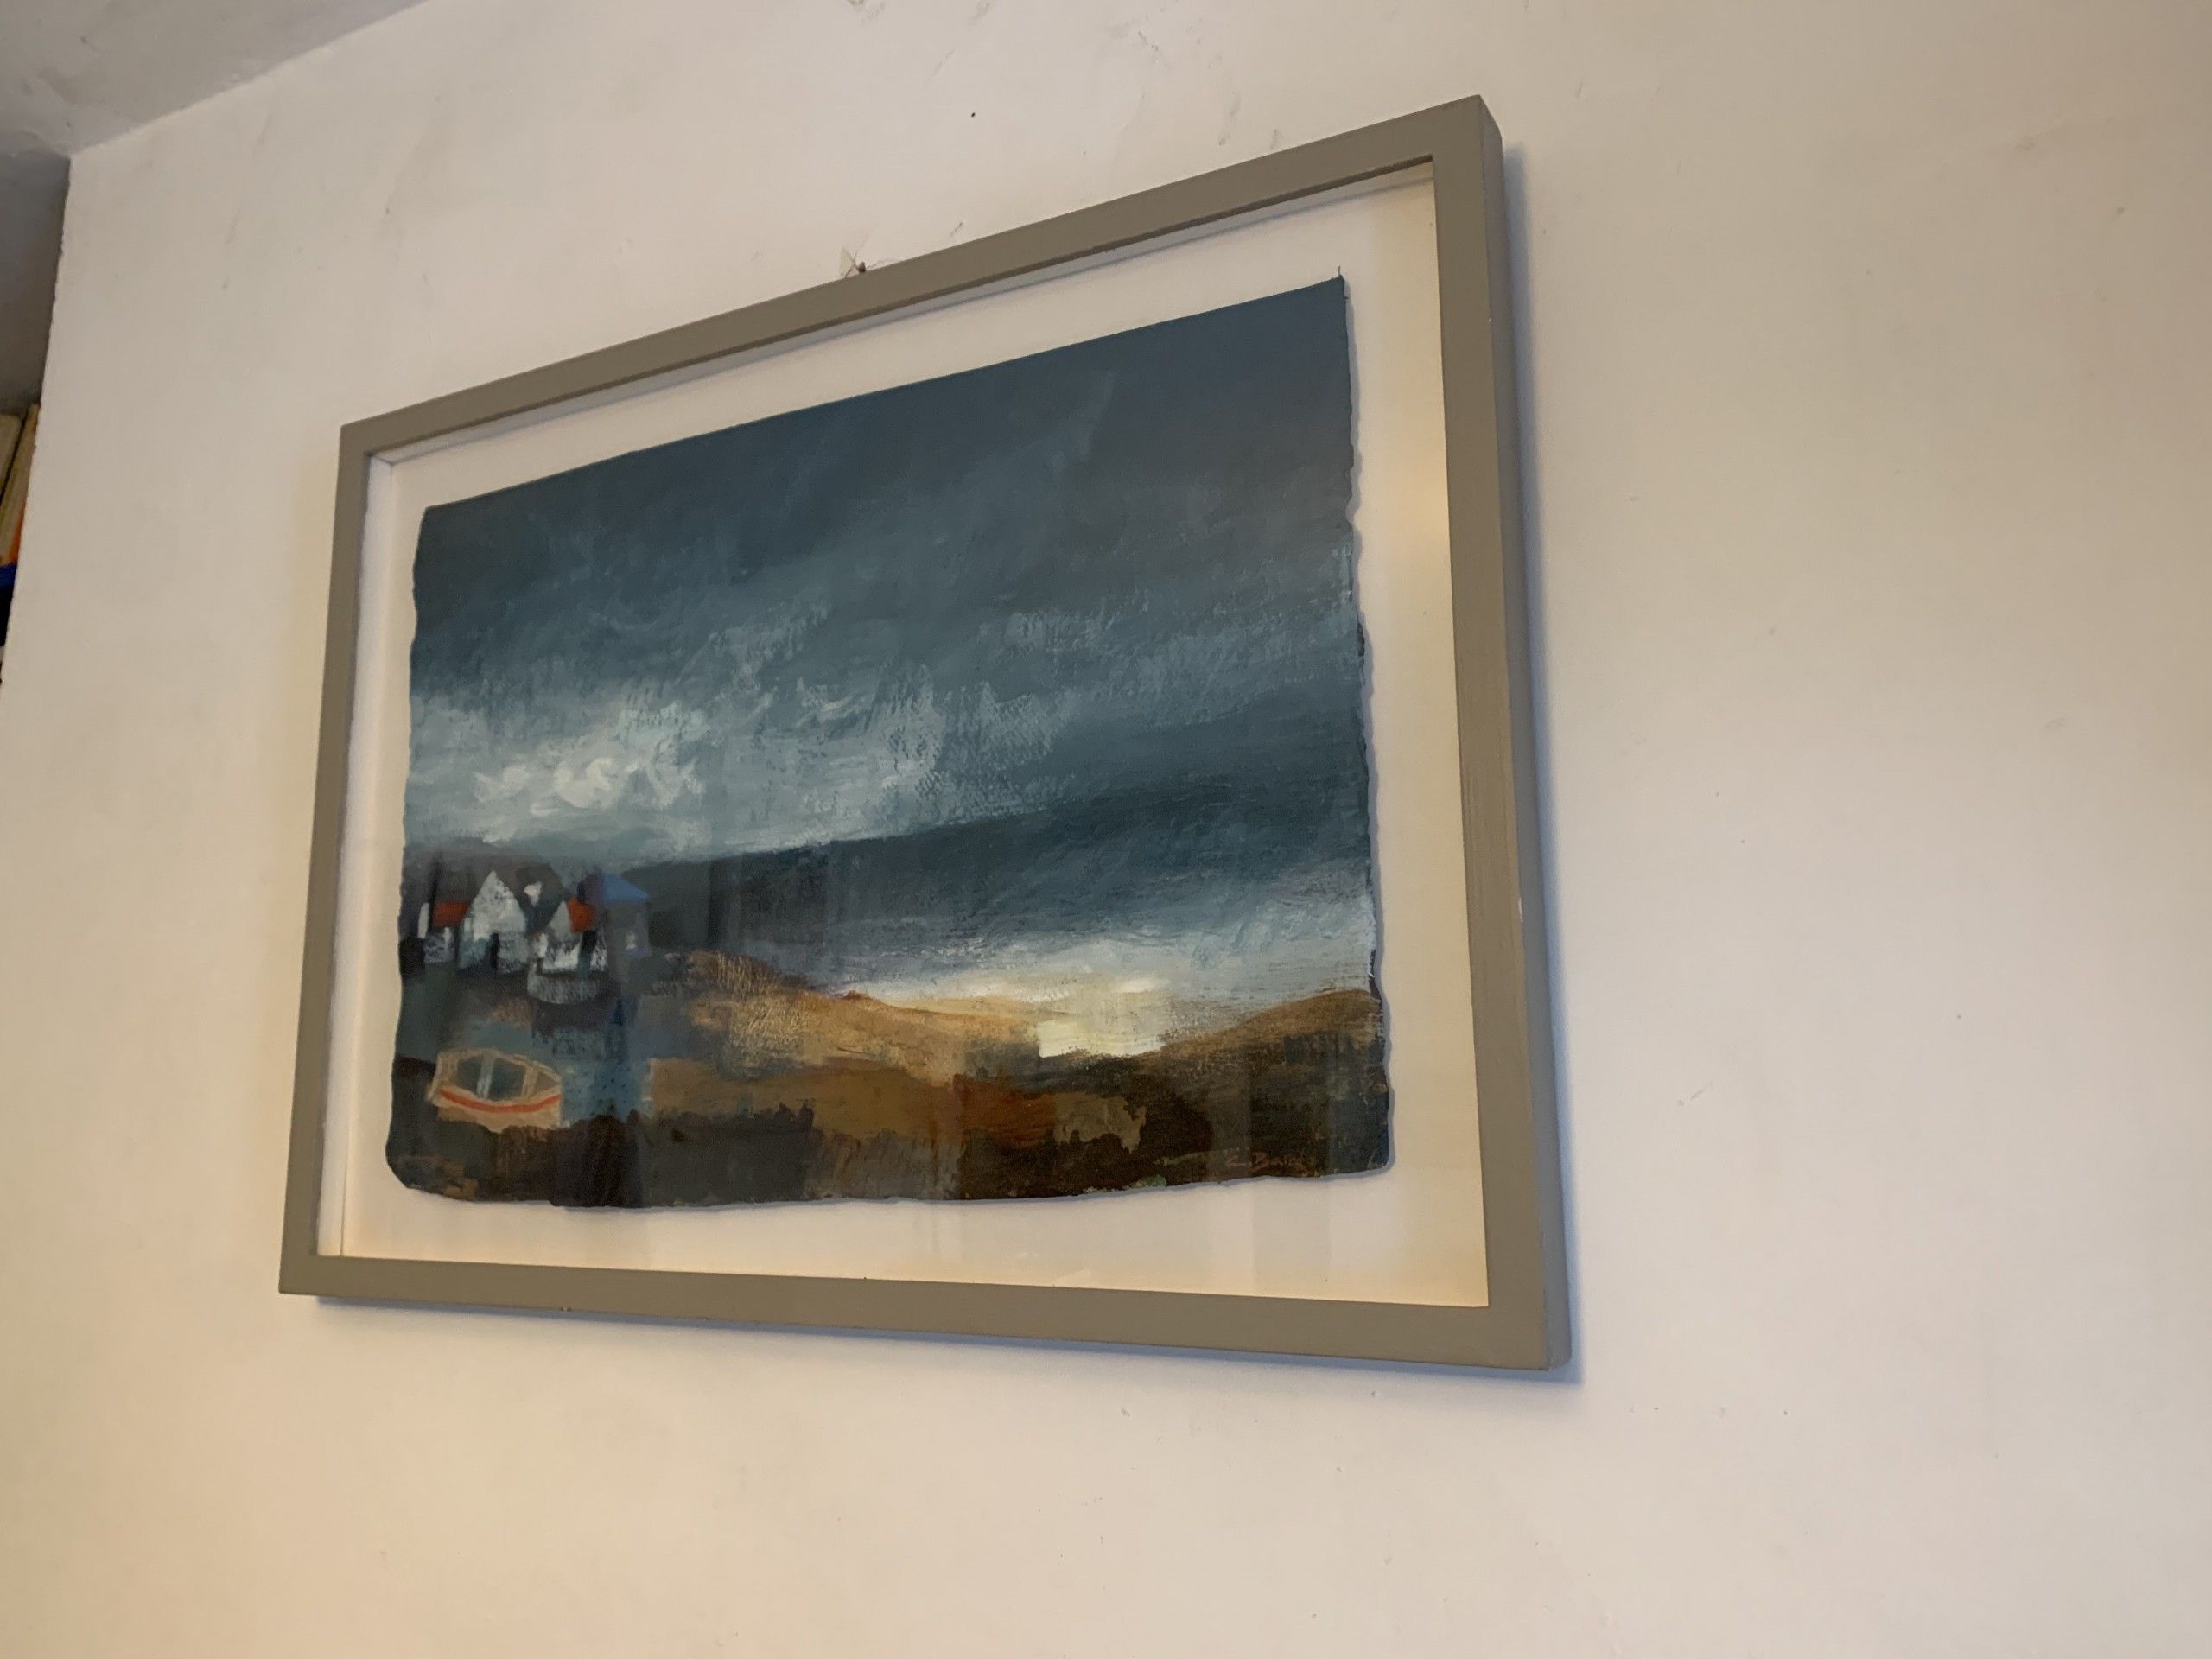 Coastguard Cottages by Charlie Baird - Secondary Image